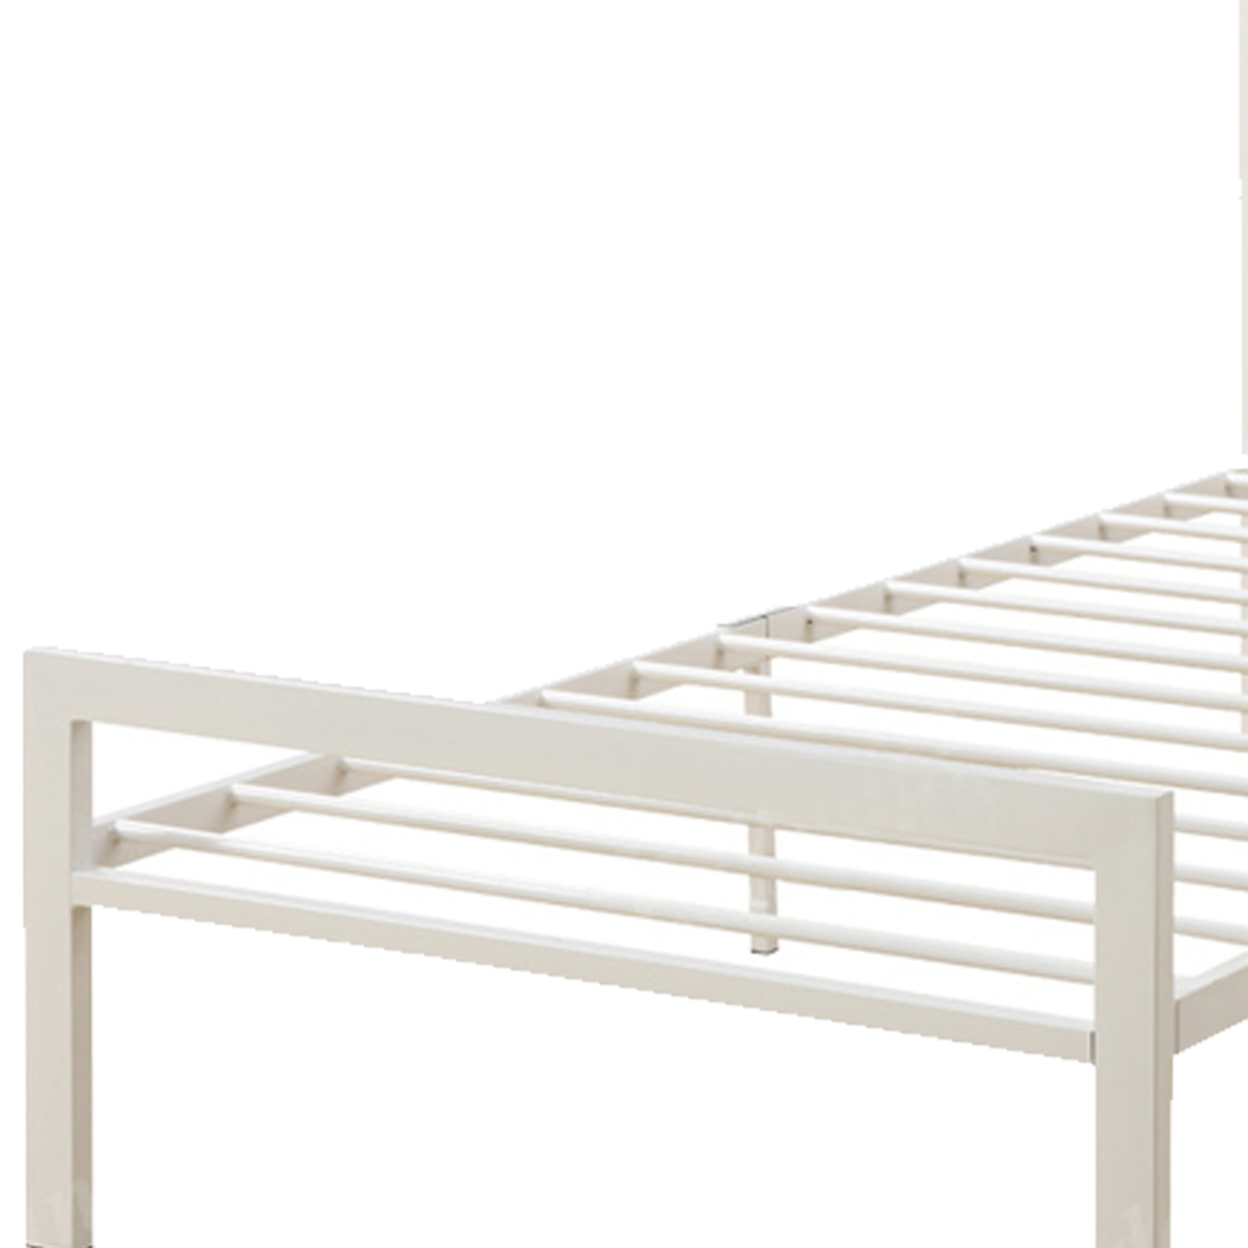 Metal Frame Twin Bed With Leather Upholstered Headboard White- Saltoro Sherpi